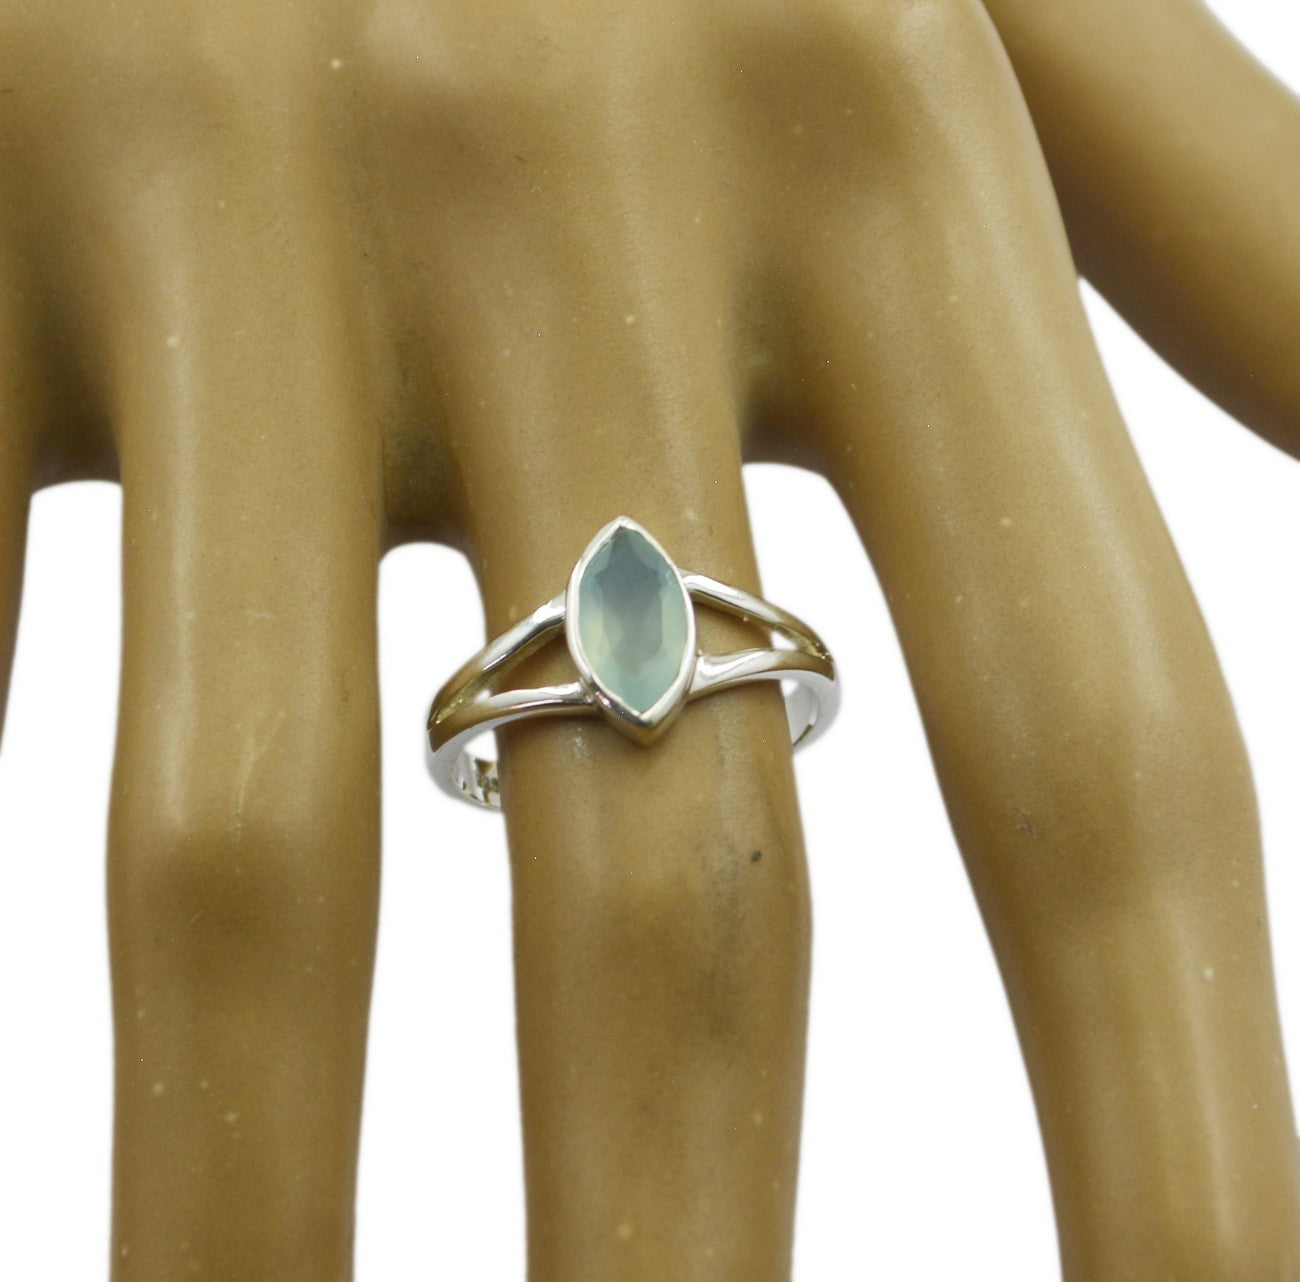 Very Nice Gem Aqua Chalcedony 925 Sterling Silver Ring Guess Jewelry